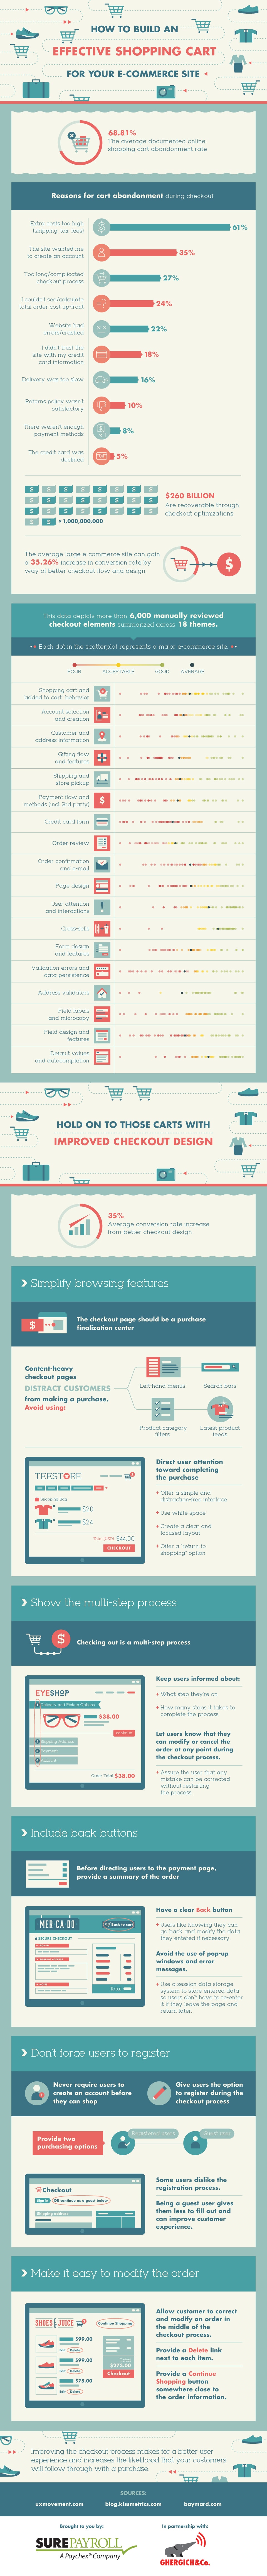 Infographic: How to Build an Effective Shopping Cart for Your eCommerce Site